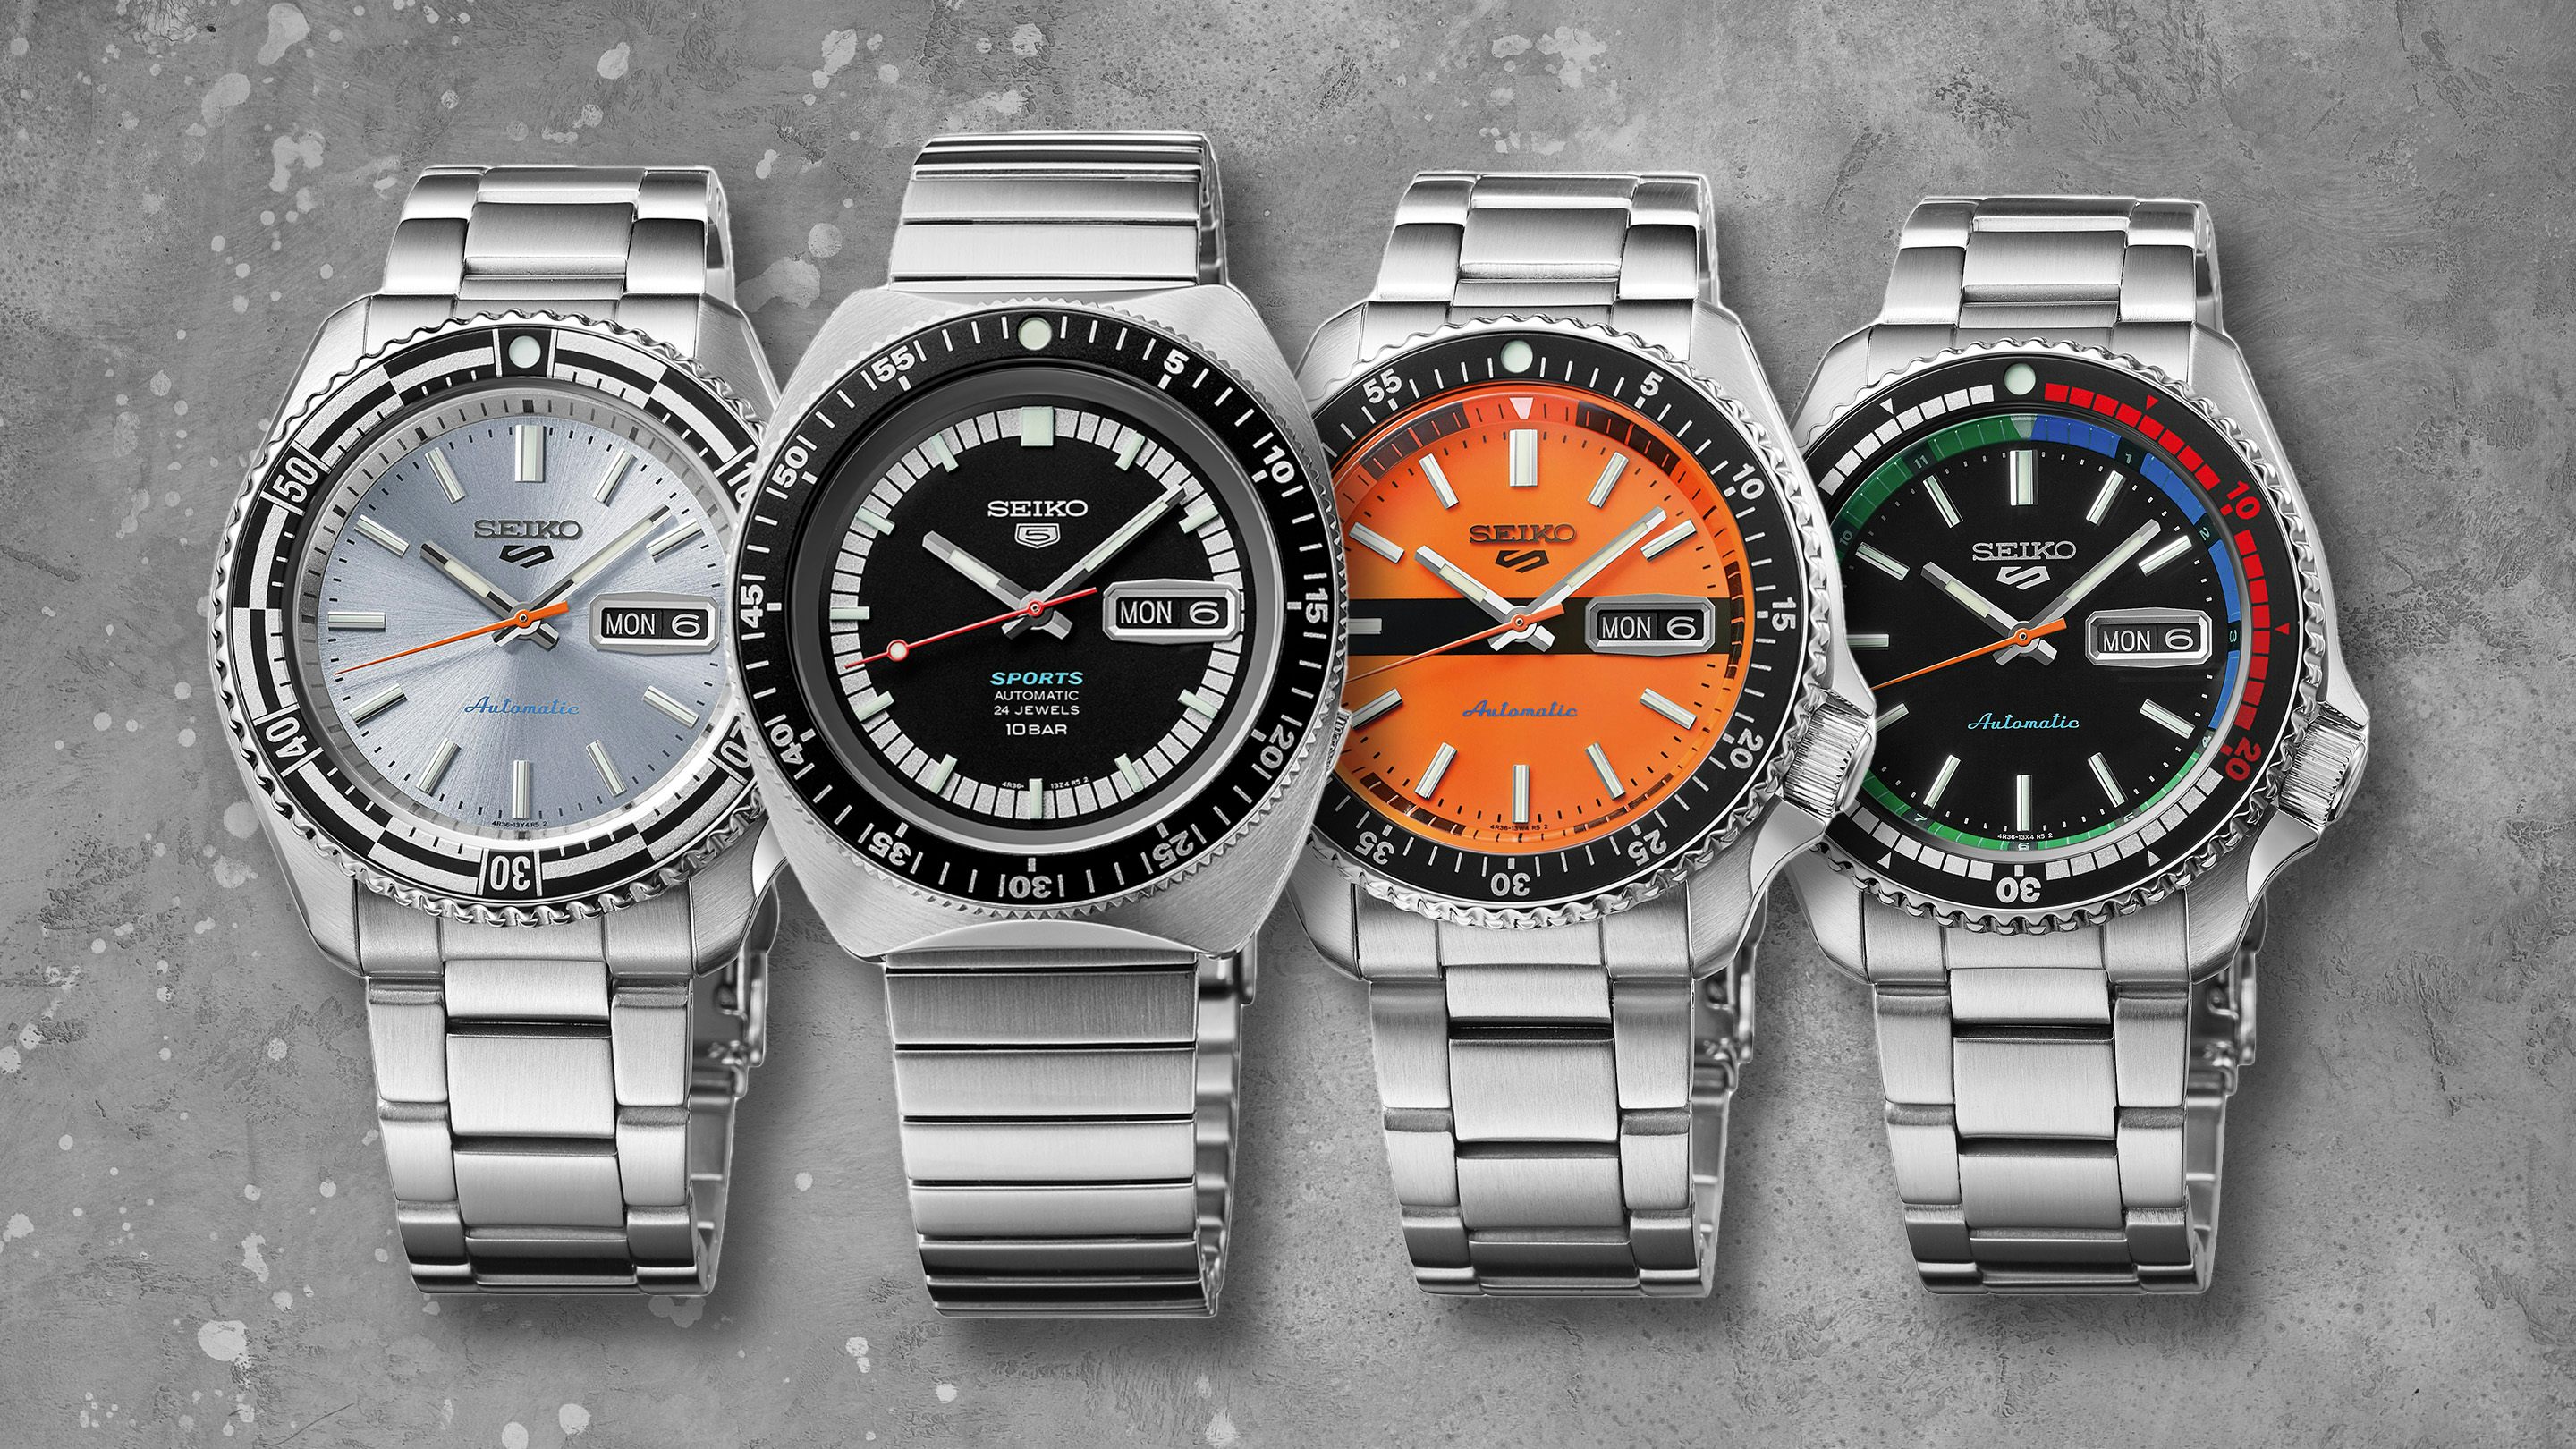 alien omvendt innovation Introducing The New Seiko 5 Sports 55th Anniversary Editions